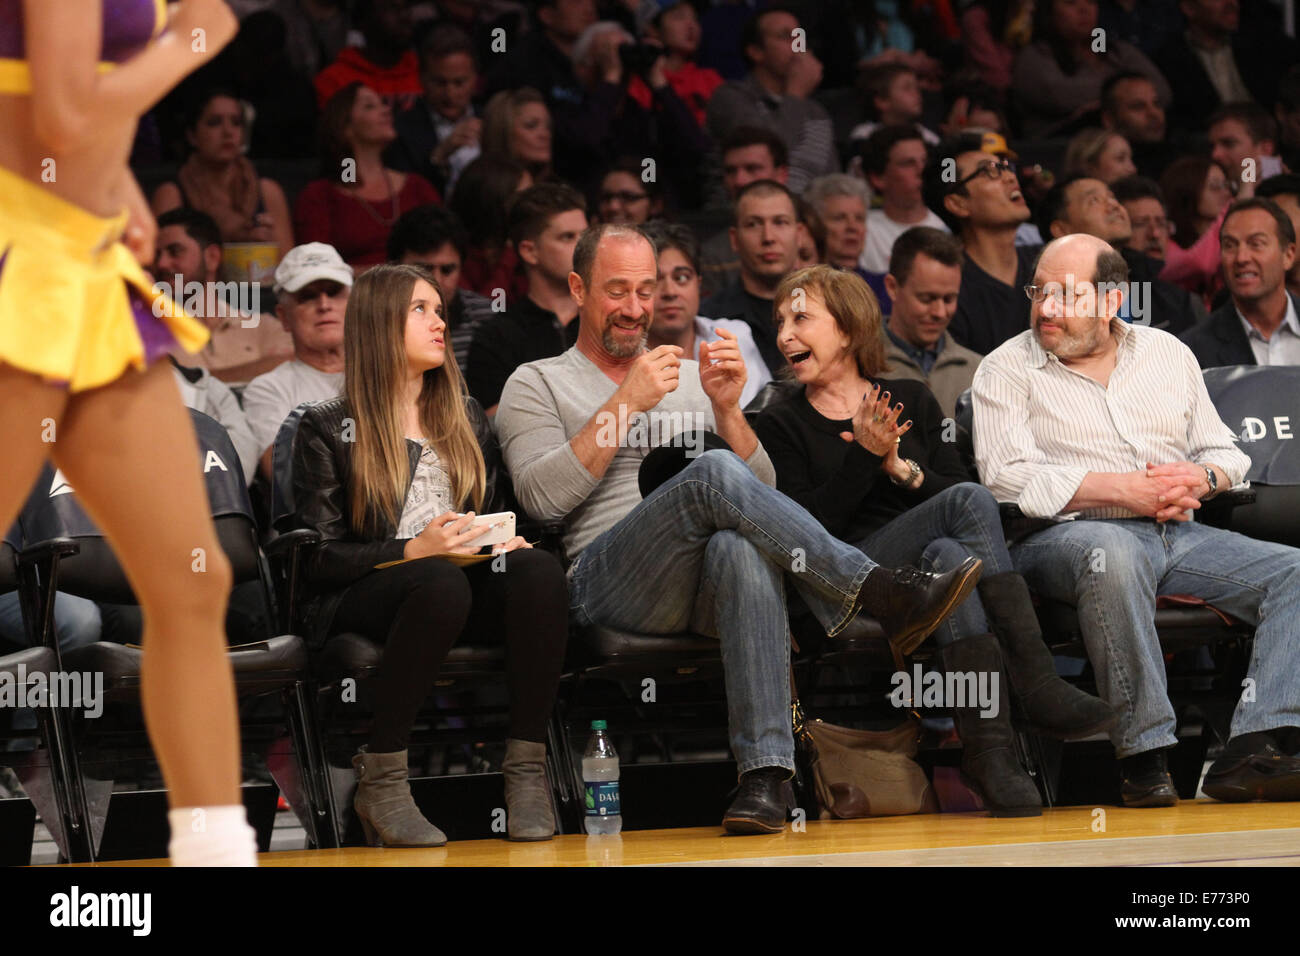 Celebrities courtside at the Los Angeles Lakers v New Orleans Pelicans NBA  basketball game at the Staples Center. The Pelicans defeated the Lakers by  a final score of 132-125. Featuring: Ashton Kutcher,Mila